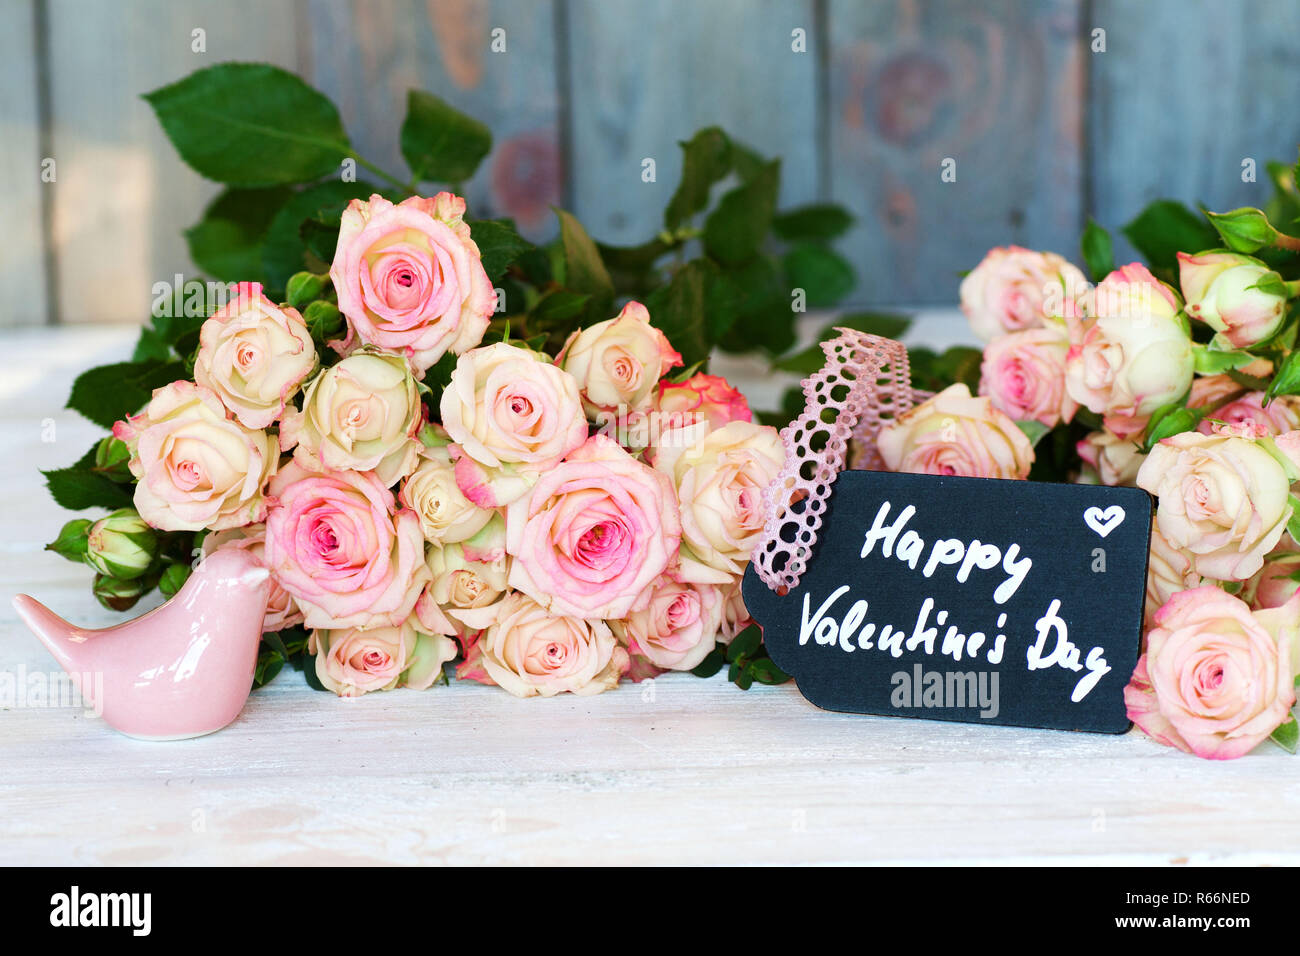 floral greetings for valentines day Stock Photo